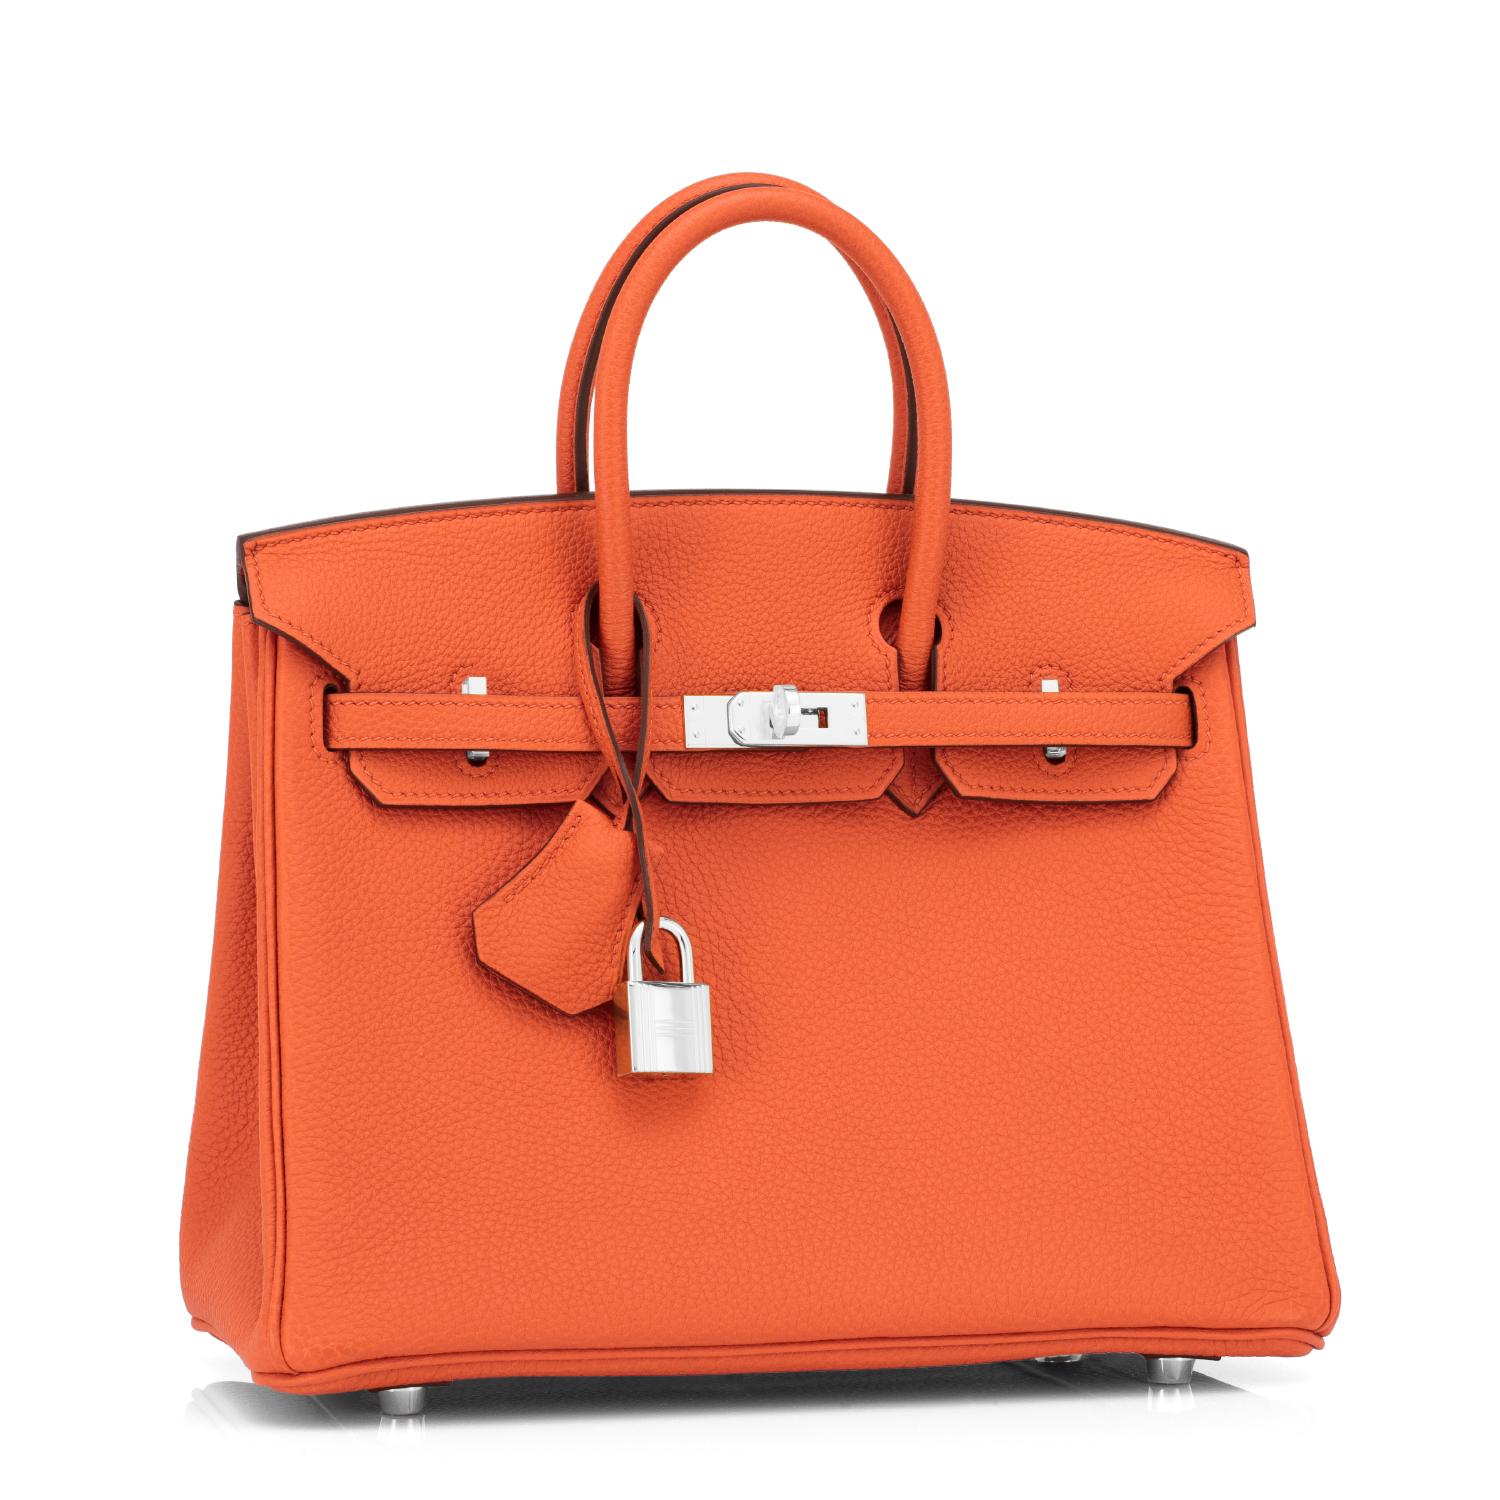 Hermes Birkin 25 Classic Hermes Orange Palladium Hardware Bag RARE W Stamp, 2024.
Ultra rare classic Hermes orange, discontinued from production for many years. 
Just purchased from Hermes store; bag bears new interior 2024 W Stamp.
Brand New in